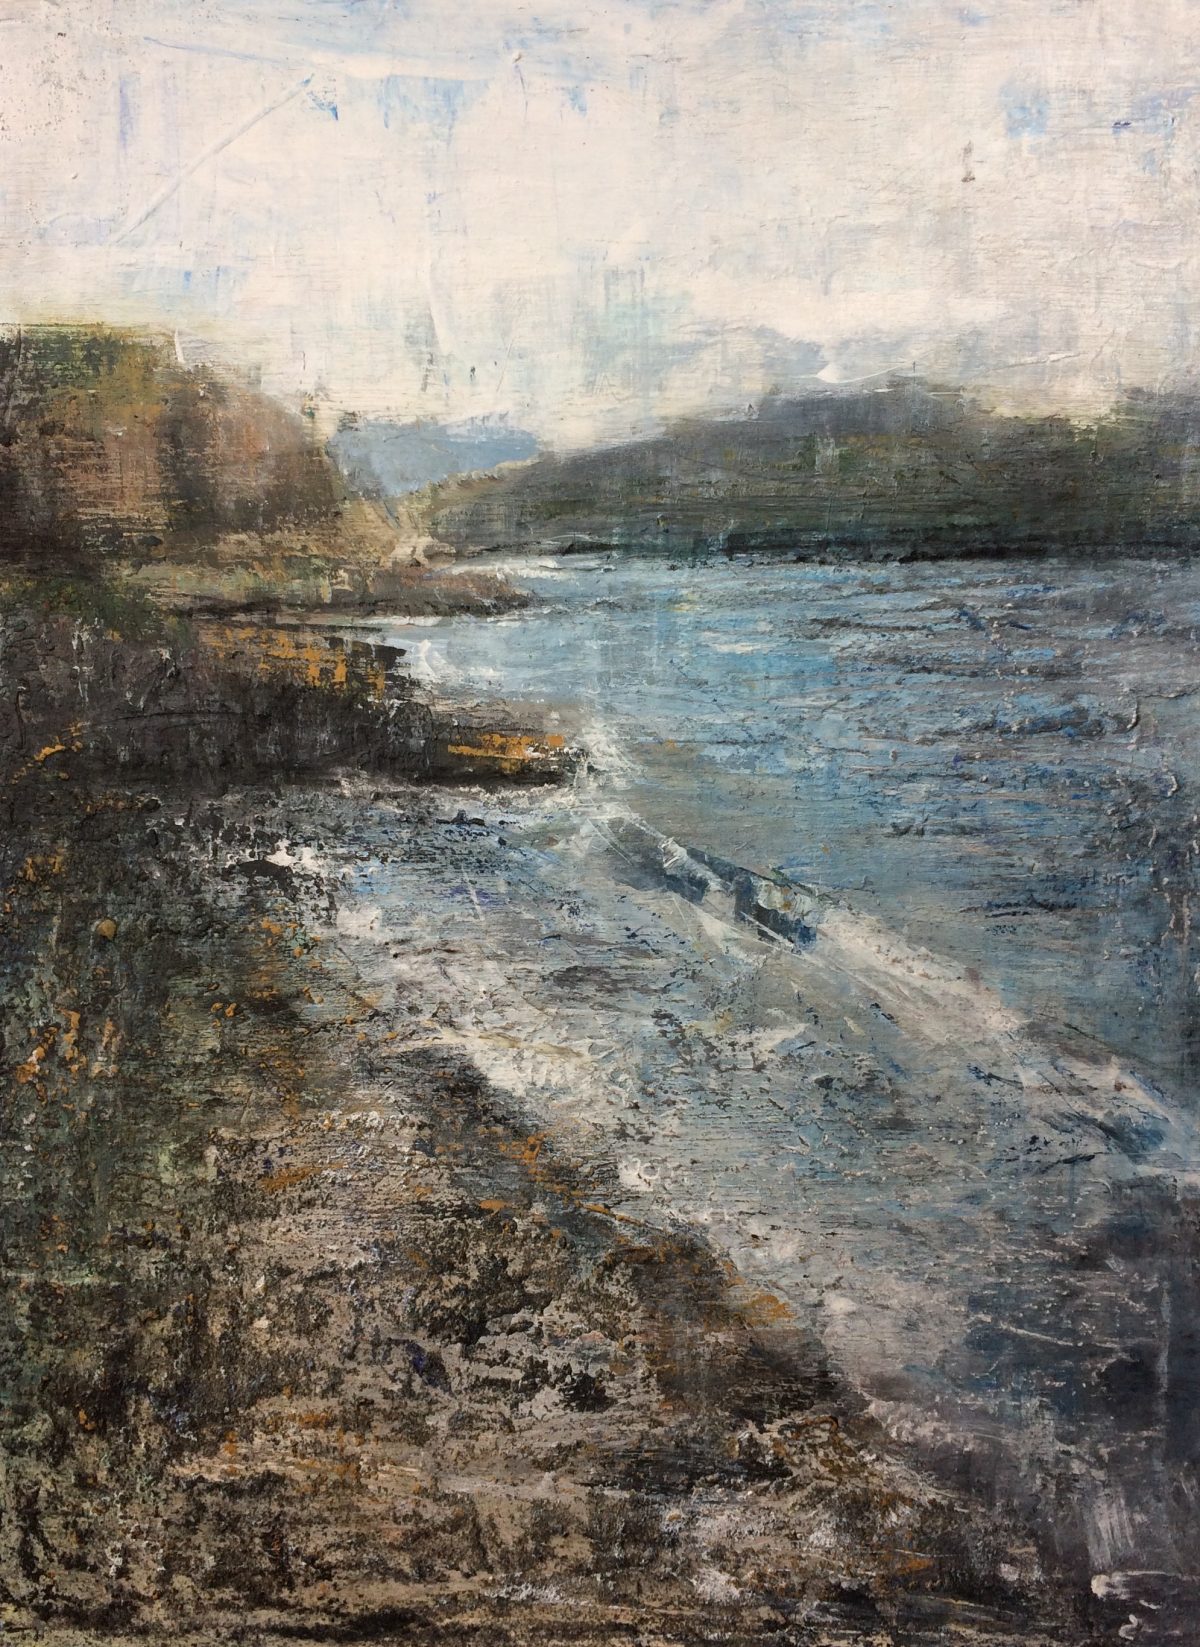 Isle Of Mull. Mixed Media on Board. 30/40cm. Landscape painting. Acrylic on Board.